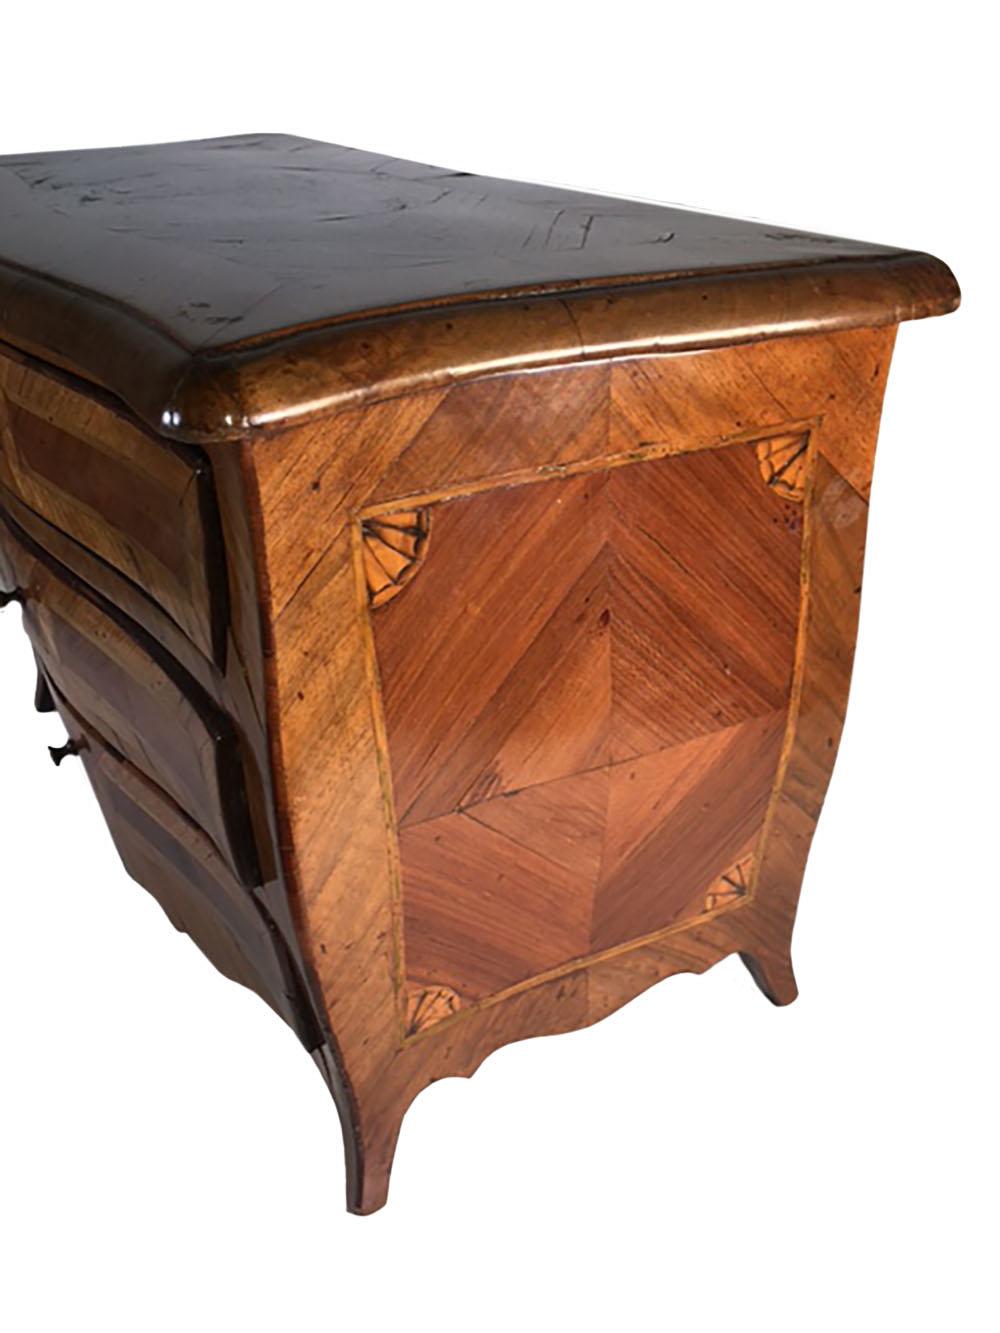 Late 18th Century 18th Century Italian Minature Table Top Exotic Woods Chest  For Sale